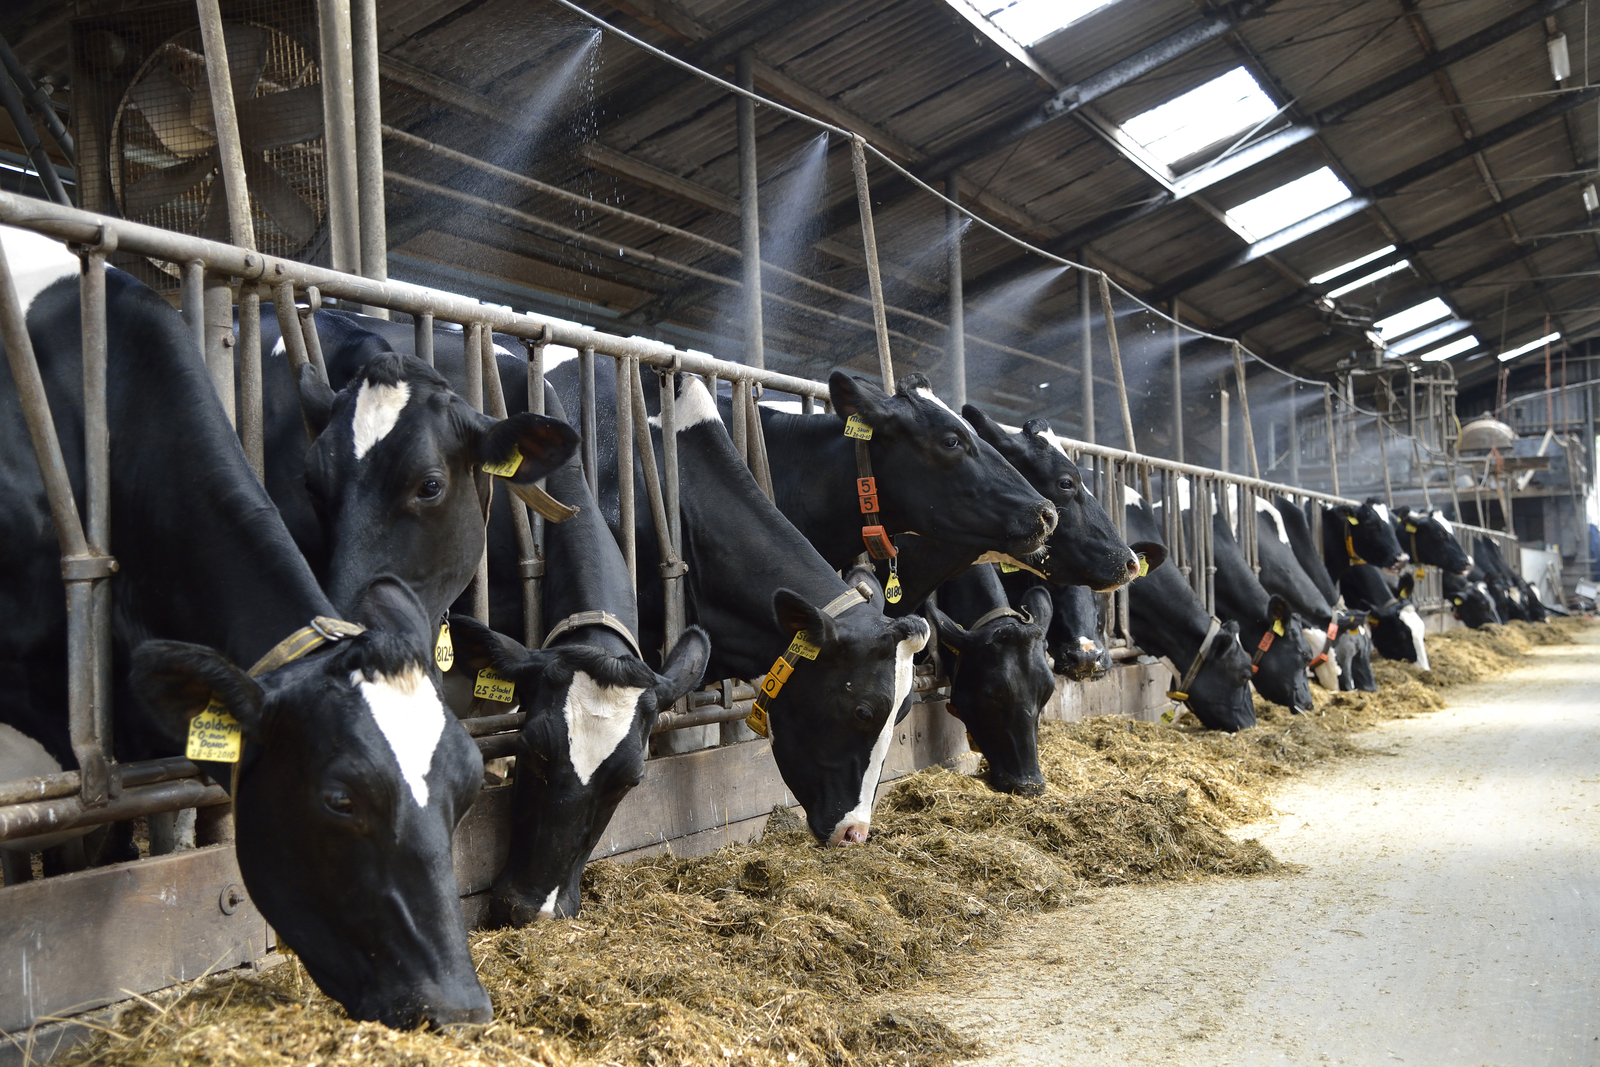 Application of heat stress knowledge in dairy